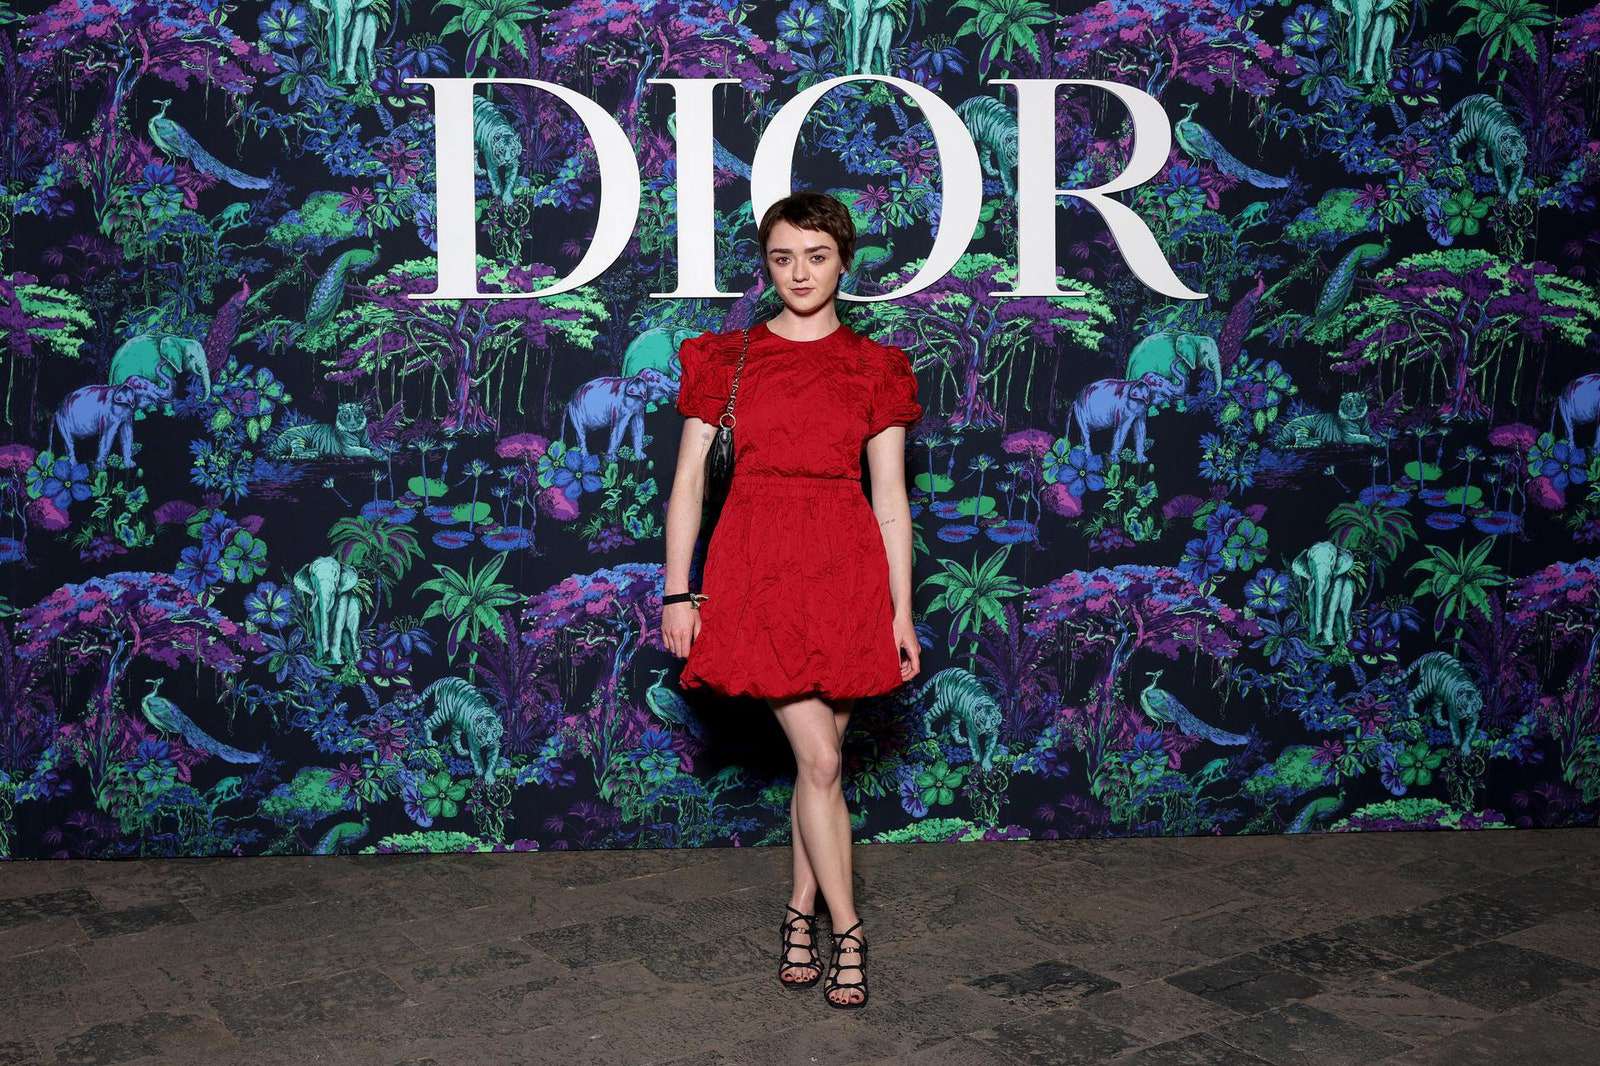 Dior Fall/Winter 2023 Show In Mumbai Maisie Williams wore a Dior red cotton dress. She also wore a Dior bag and shoes.